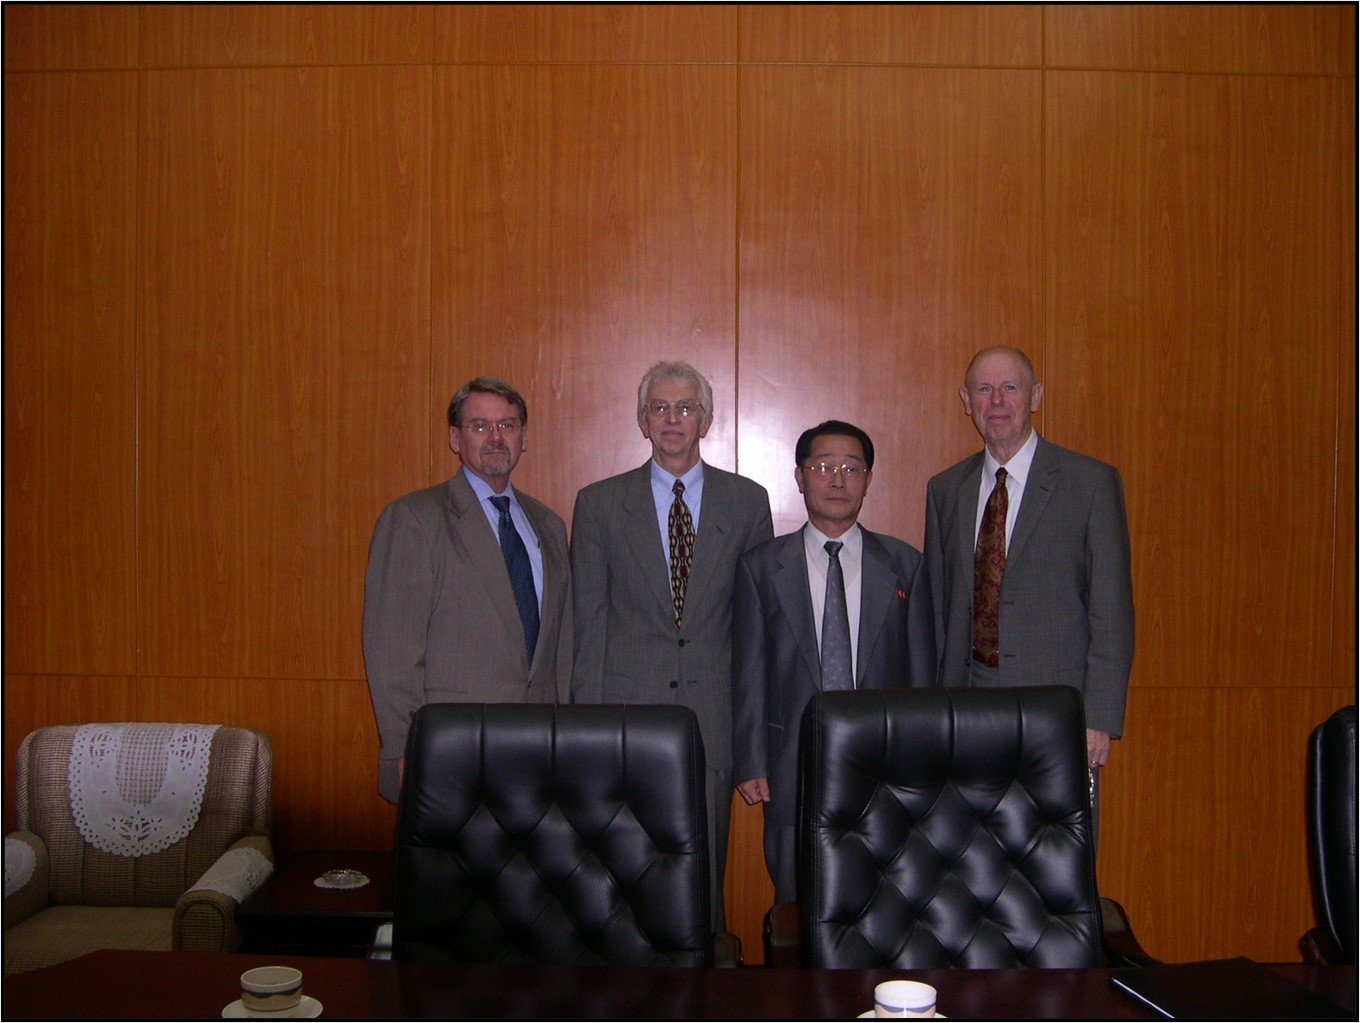 Three Americans and a North Korean host at a meeting in Aug. 2005